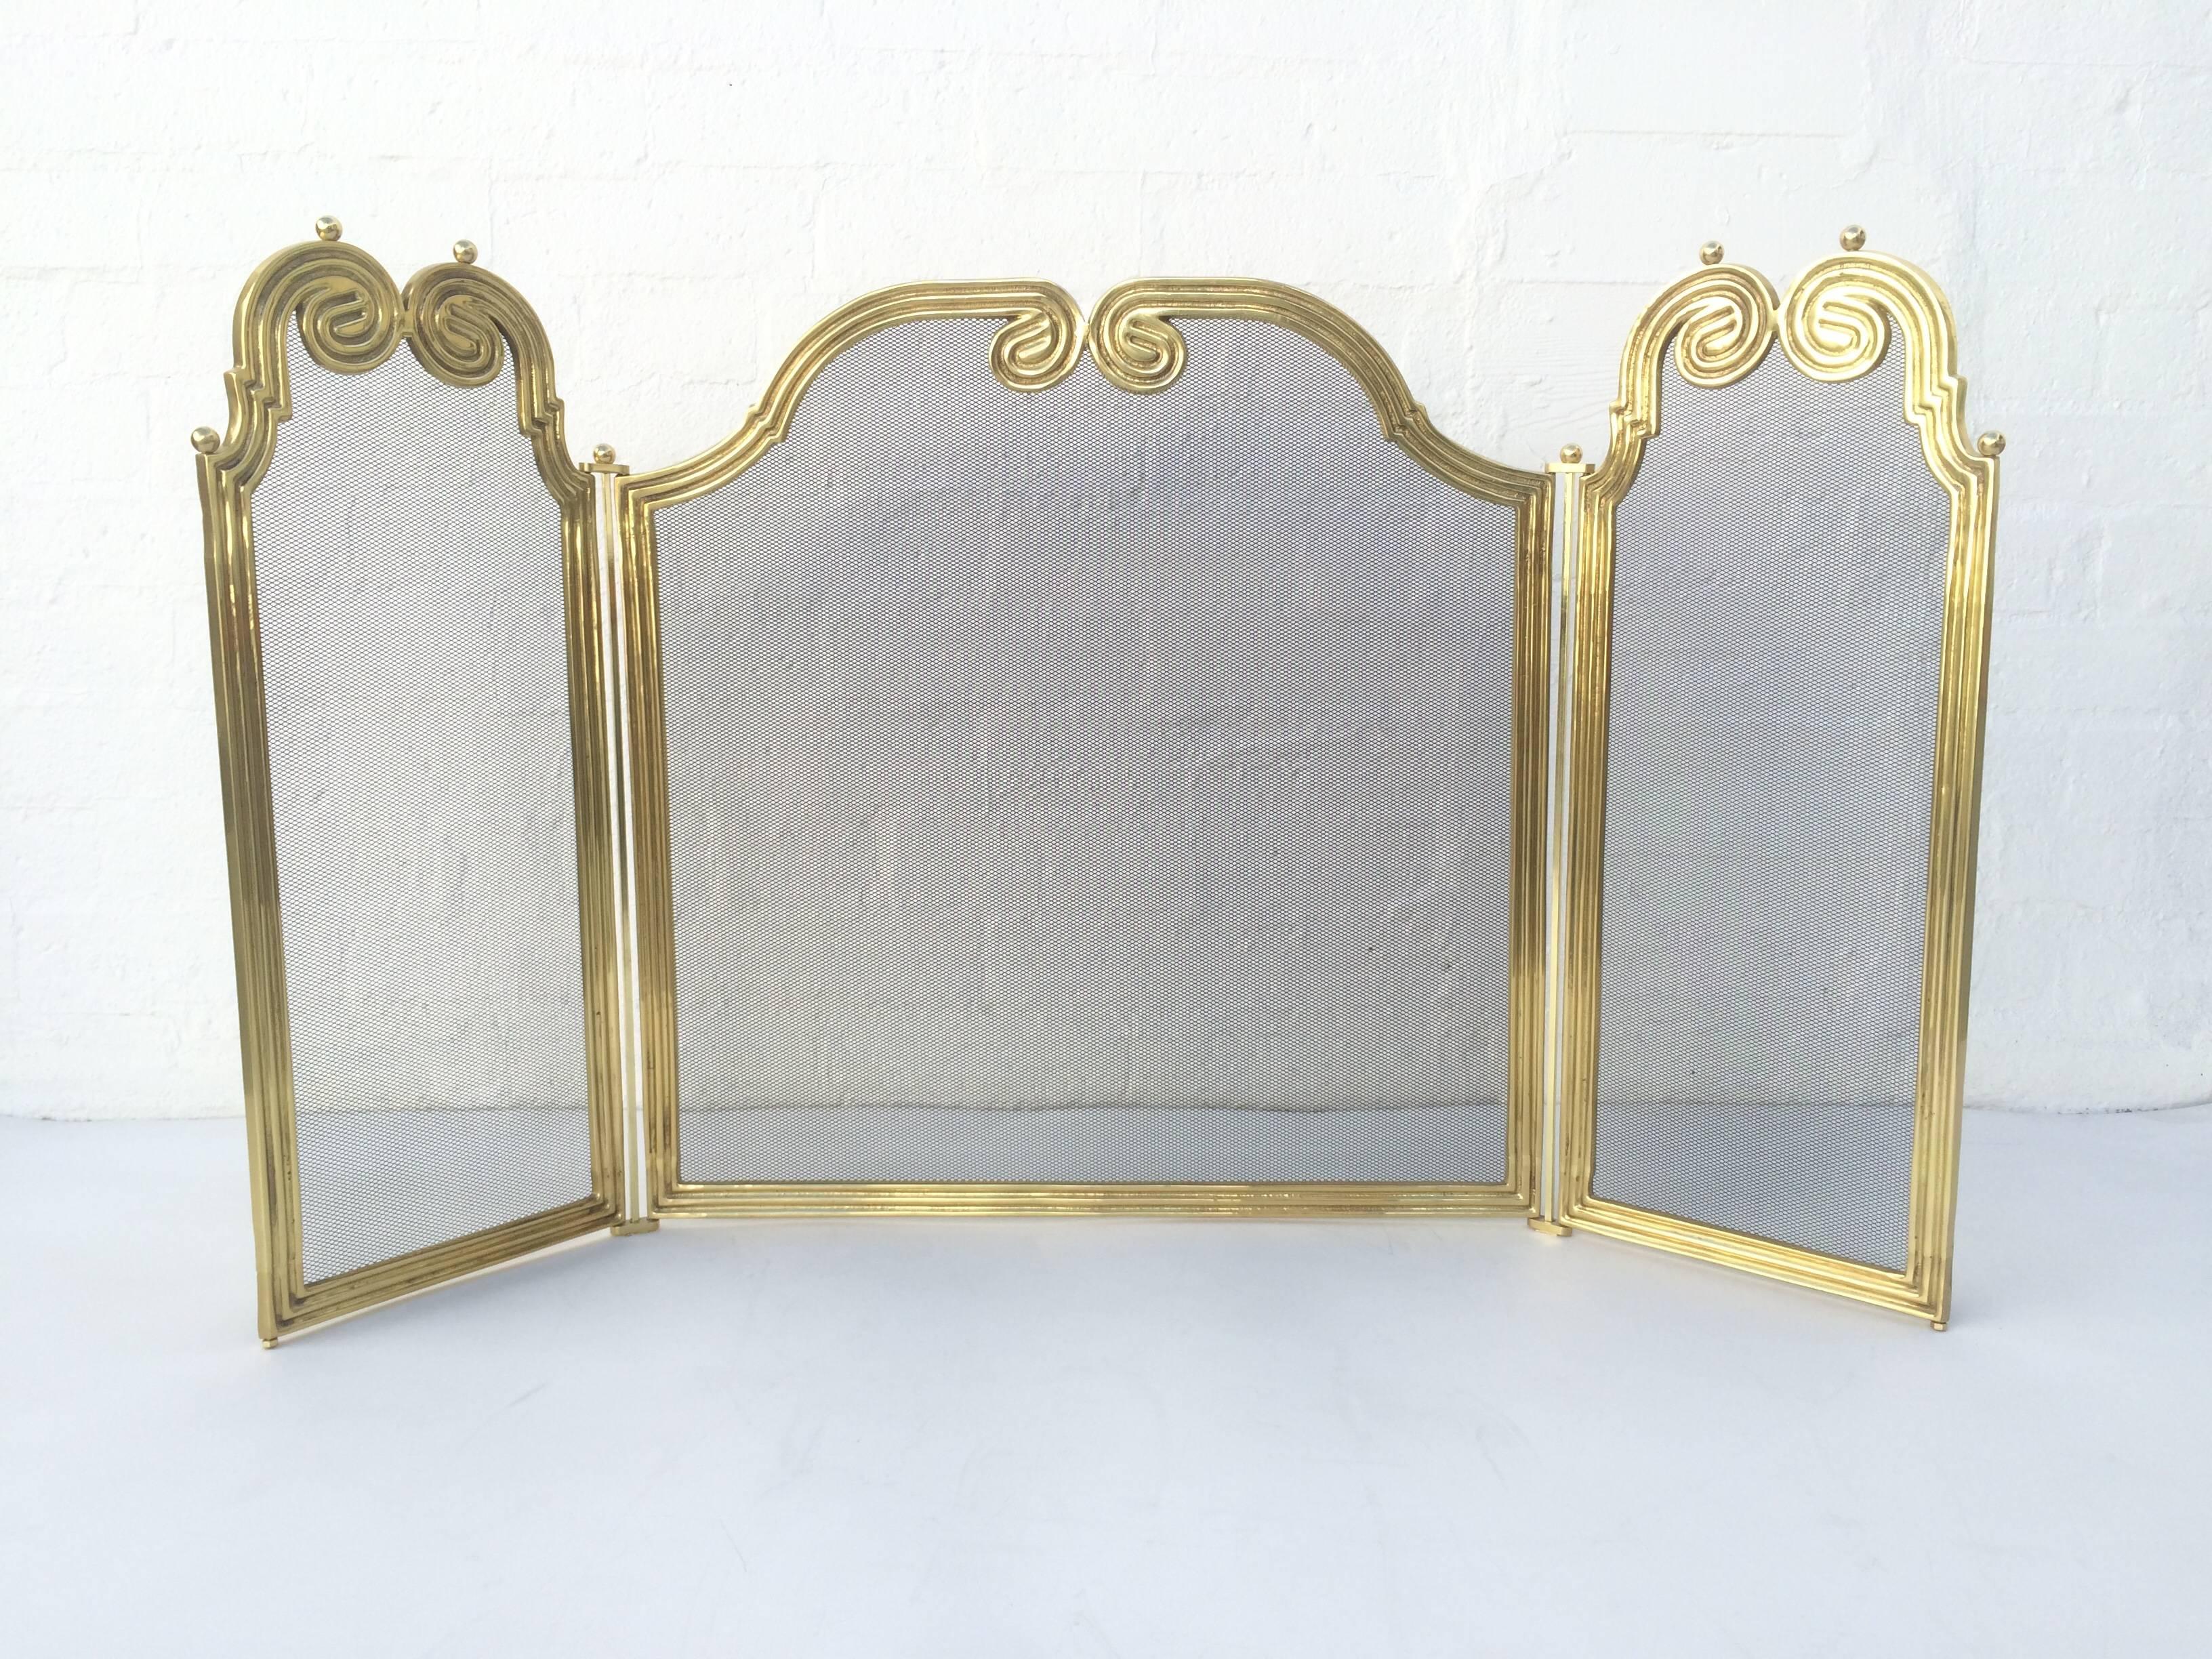 An elegant cast solid brass fireplace screen, 
circa 1970s.
The screen measures 55 inches from end to end when it's opened all the way up. Each end section is 12 1/2 inches wide with the middle section measuring 31 inches wide. 
Height is 30.75